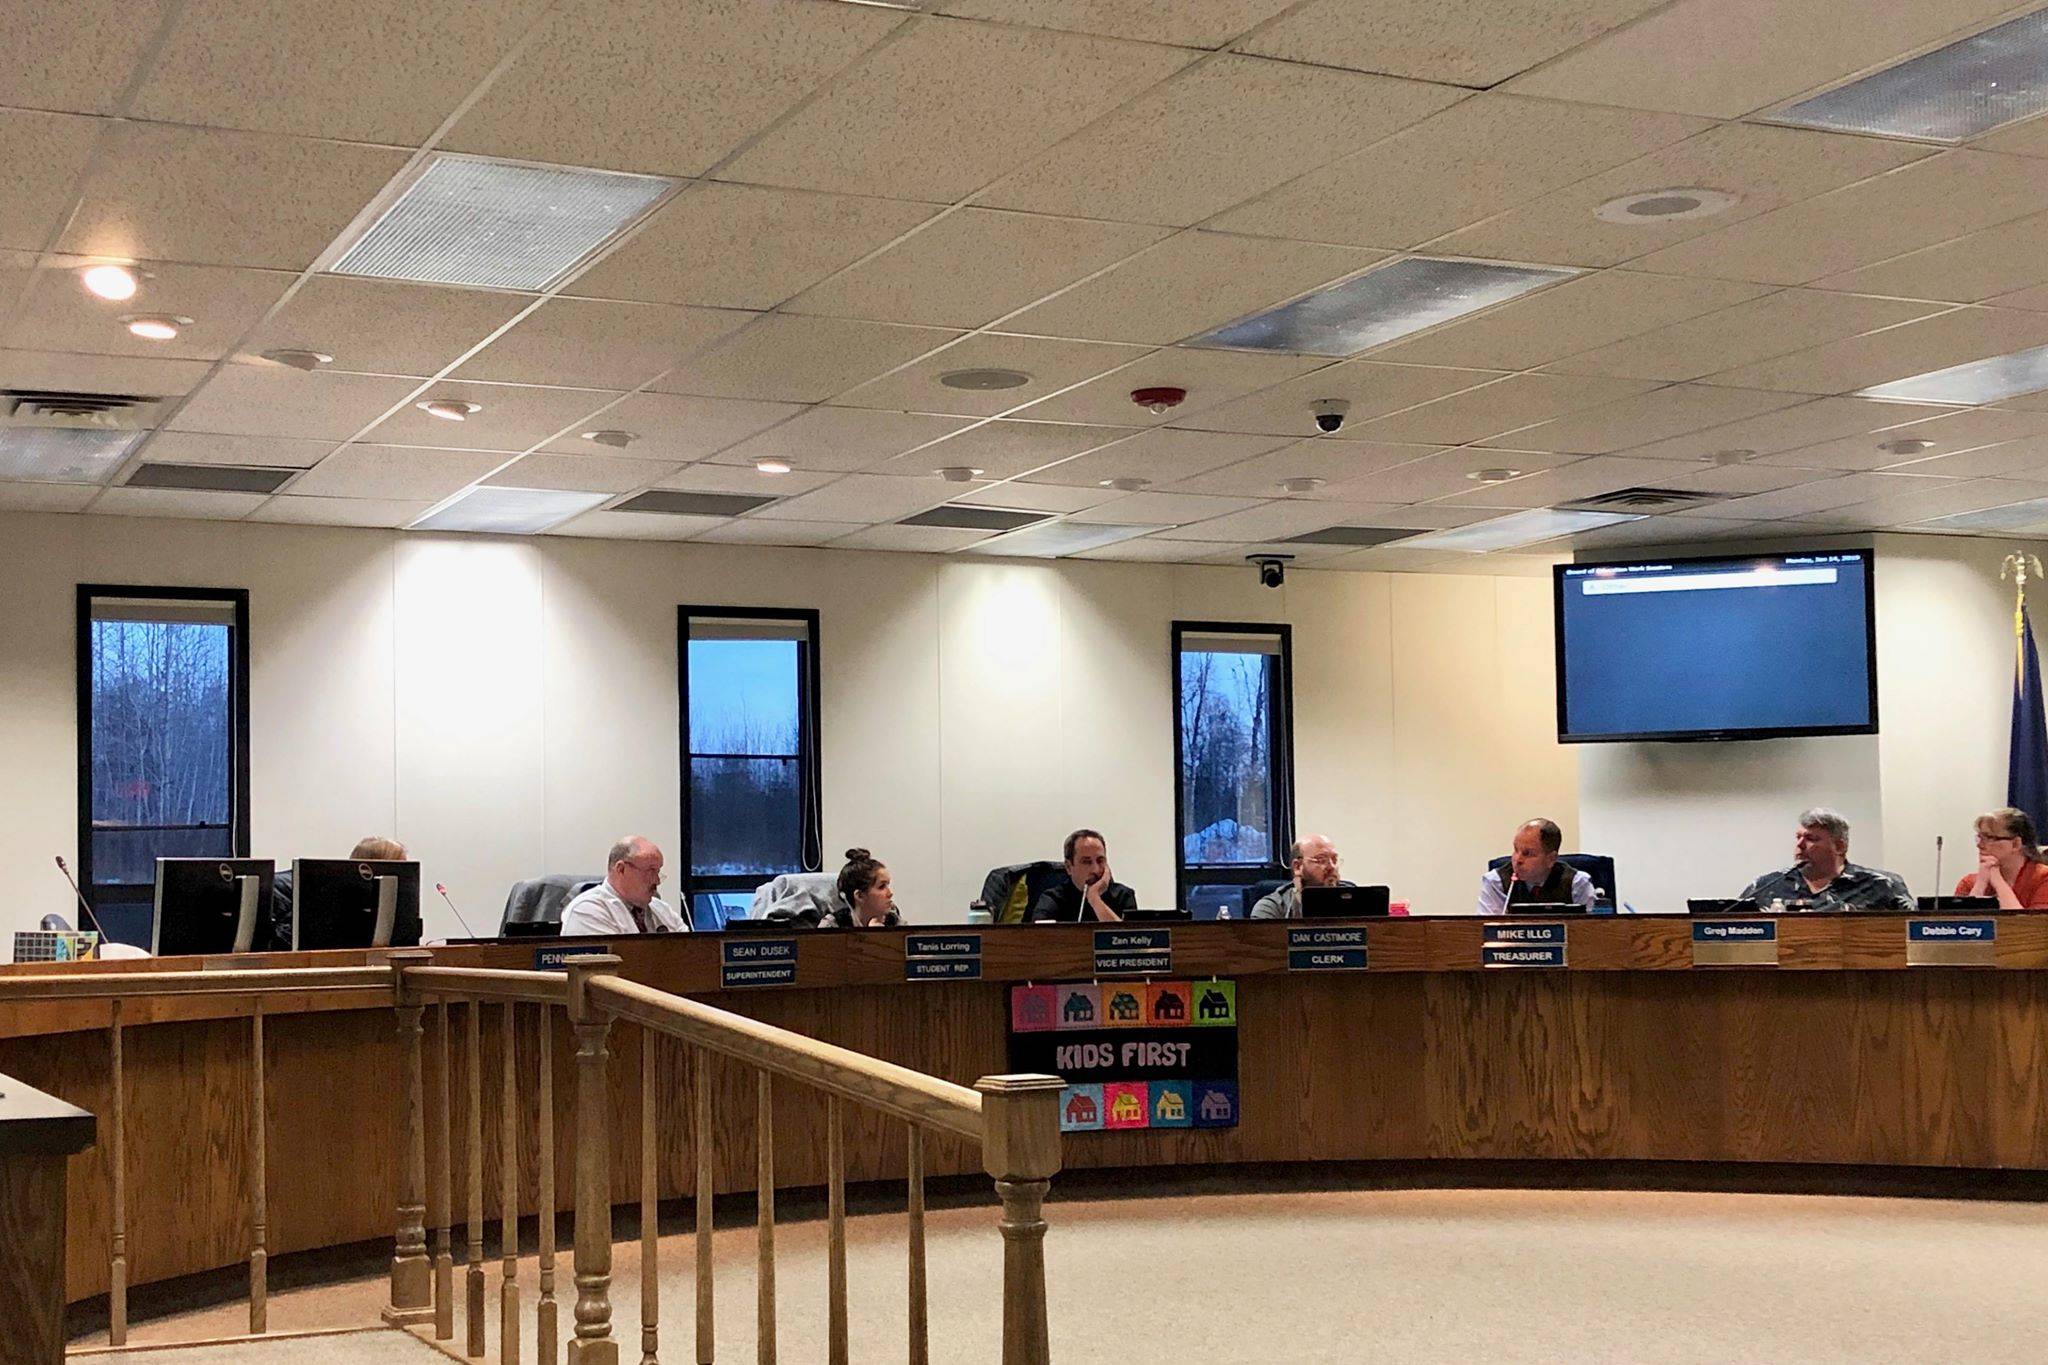 The Kenai Peninsula Borough School District Board of Education meet for a work session on Monday in Soldotna. (Photo by Victoria Petersen/Peninsula Clarion)